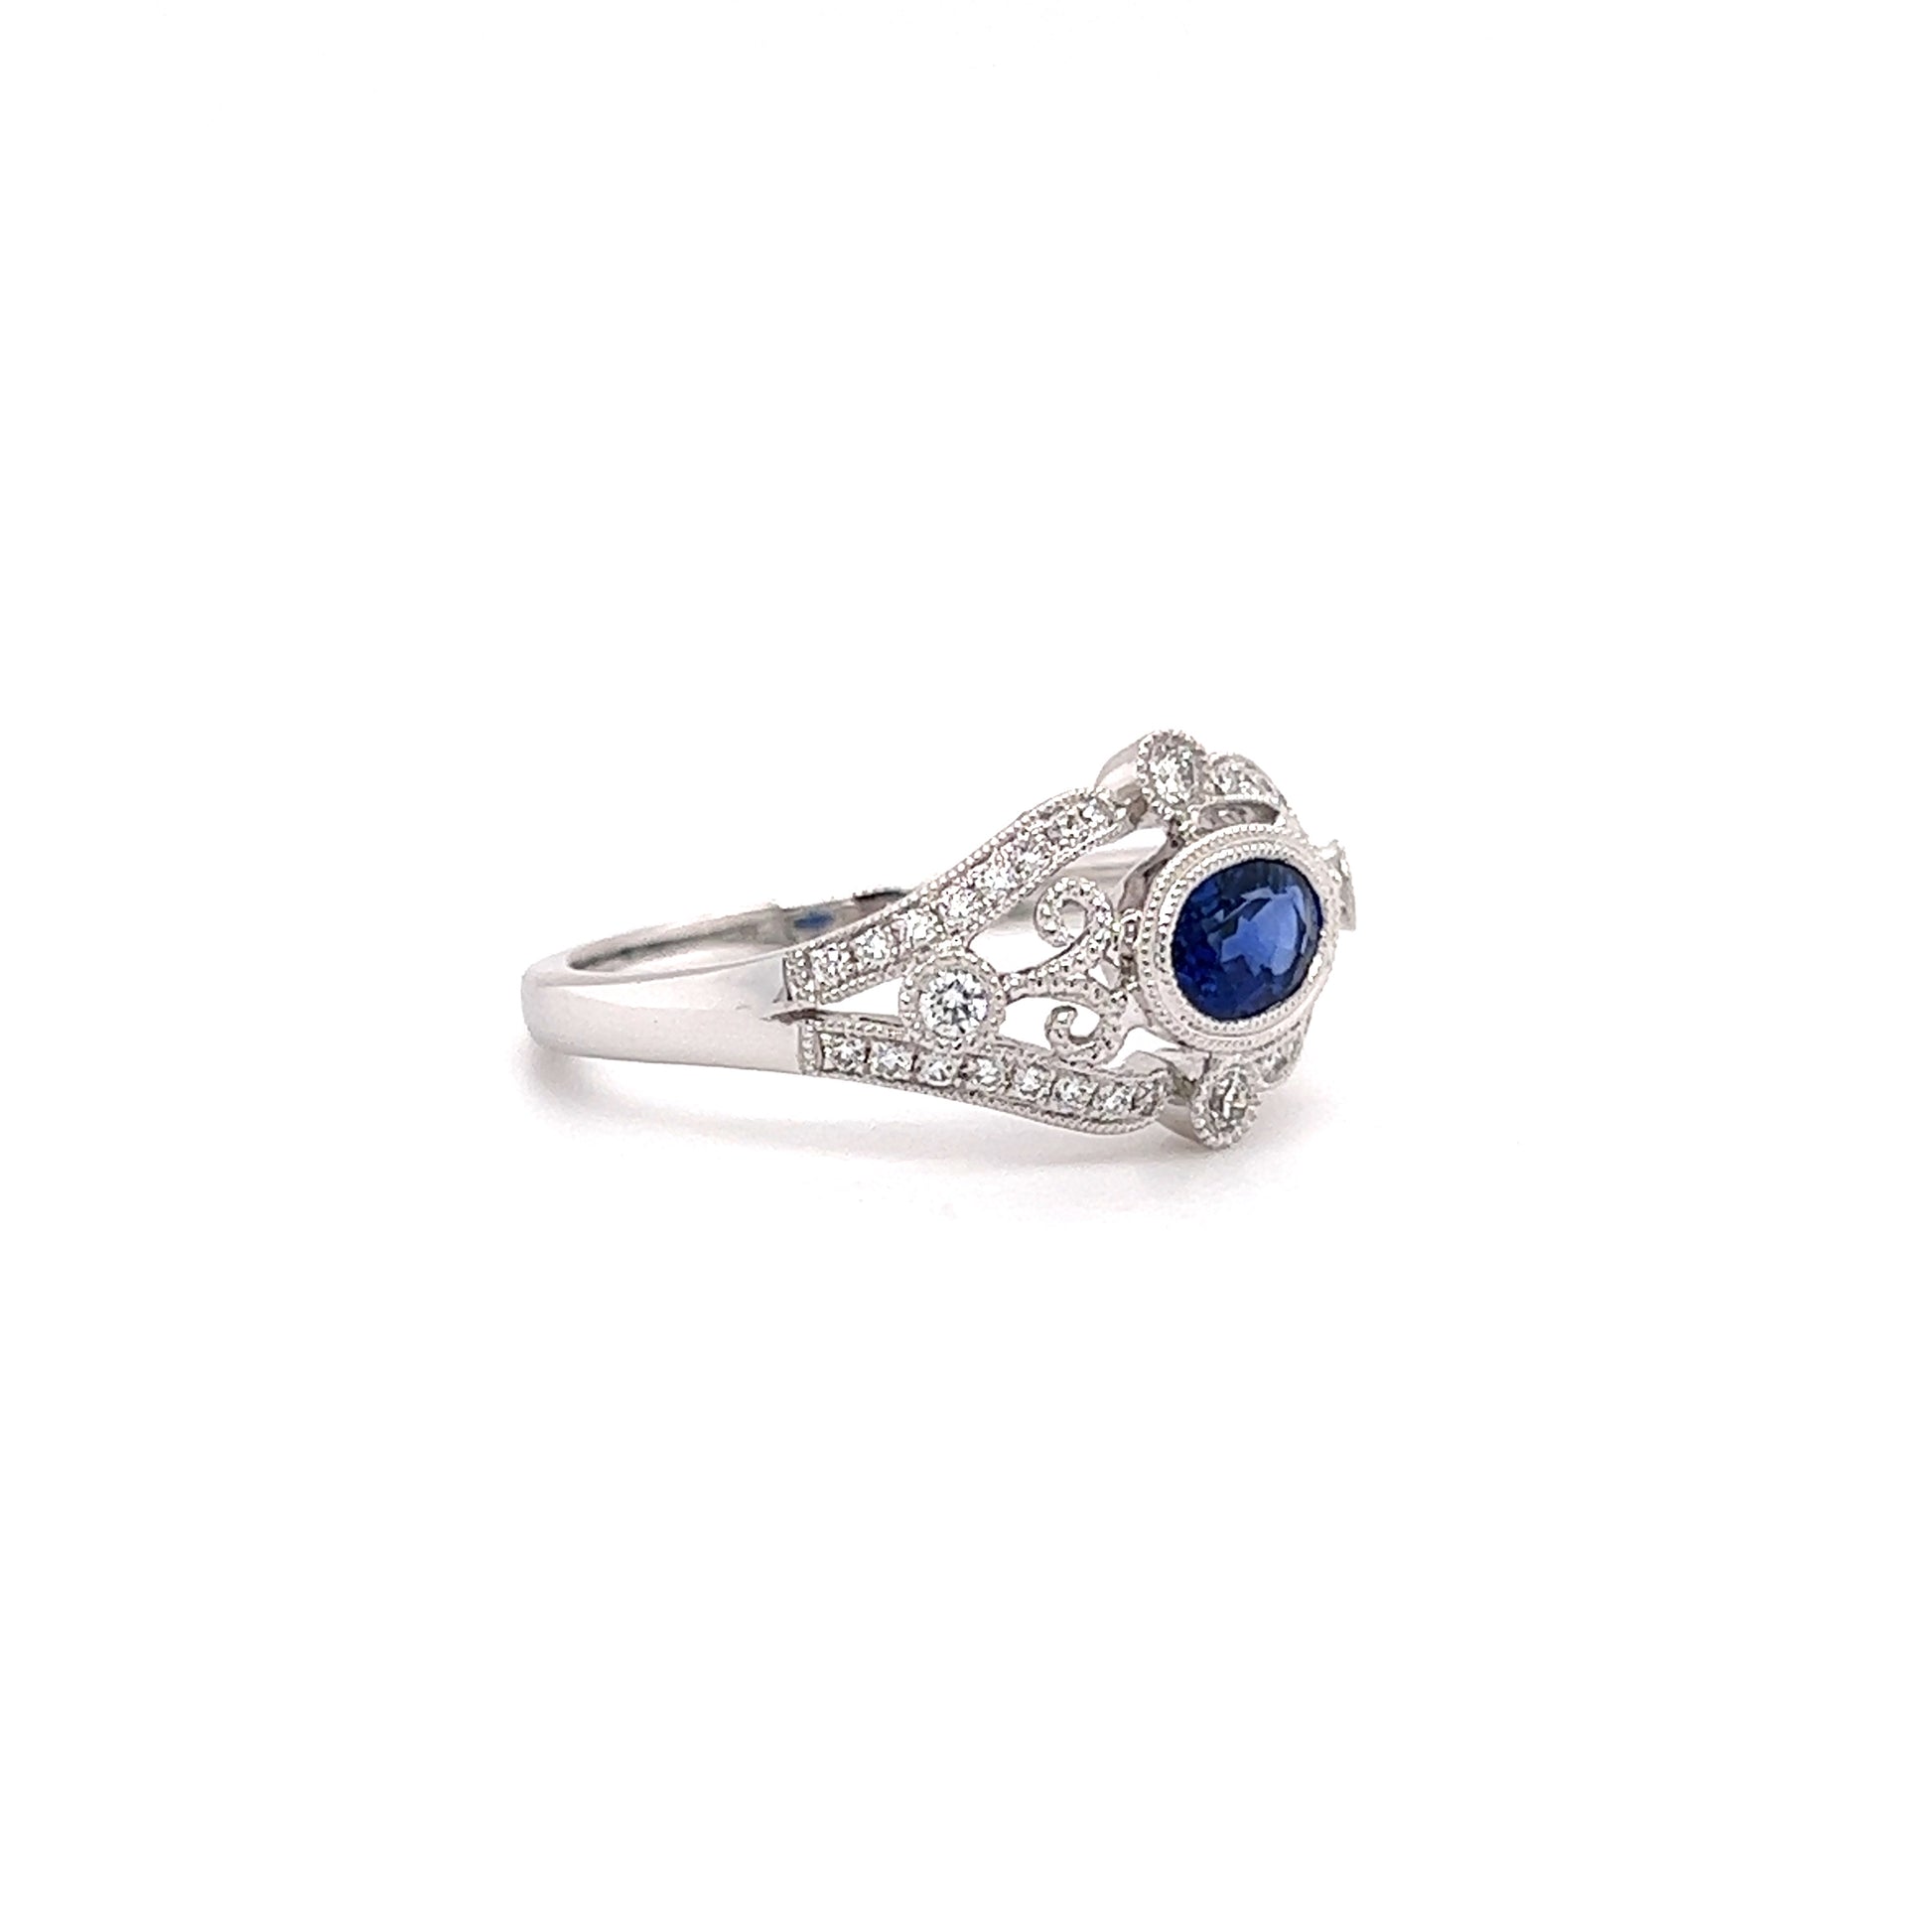 Oval Sapphire Ring with Side Diamonds and Filigree in 14K White Gold Left Side View